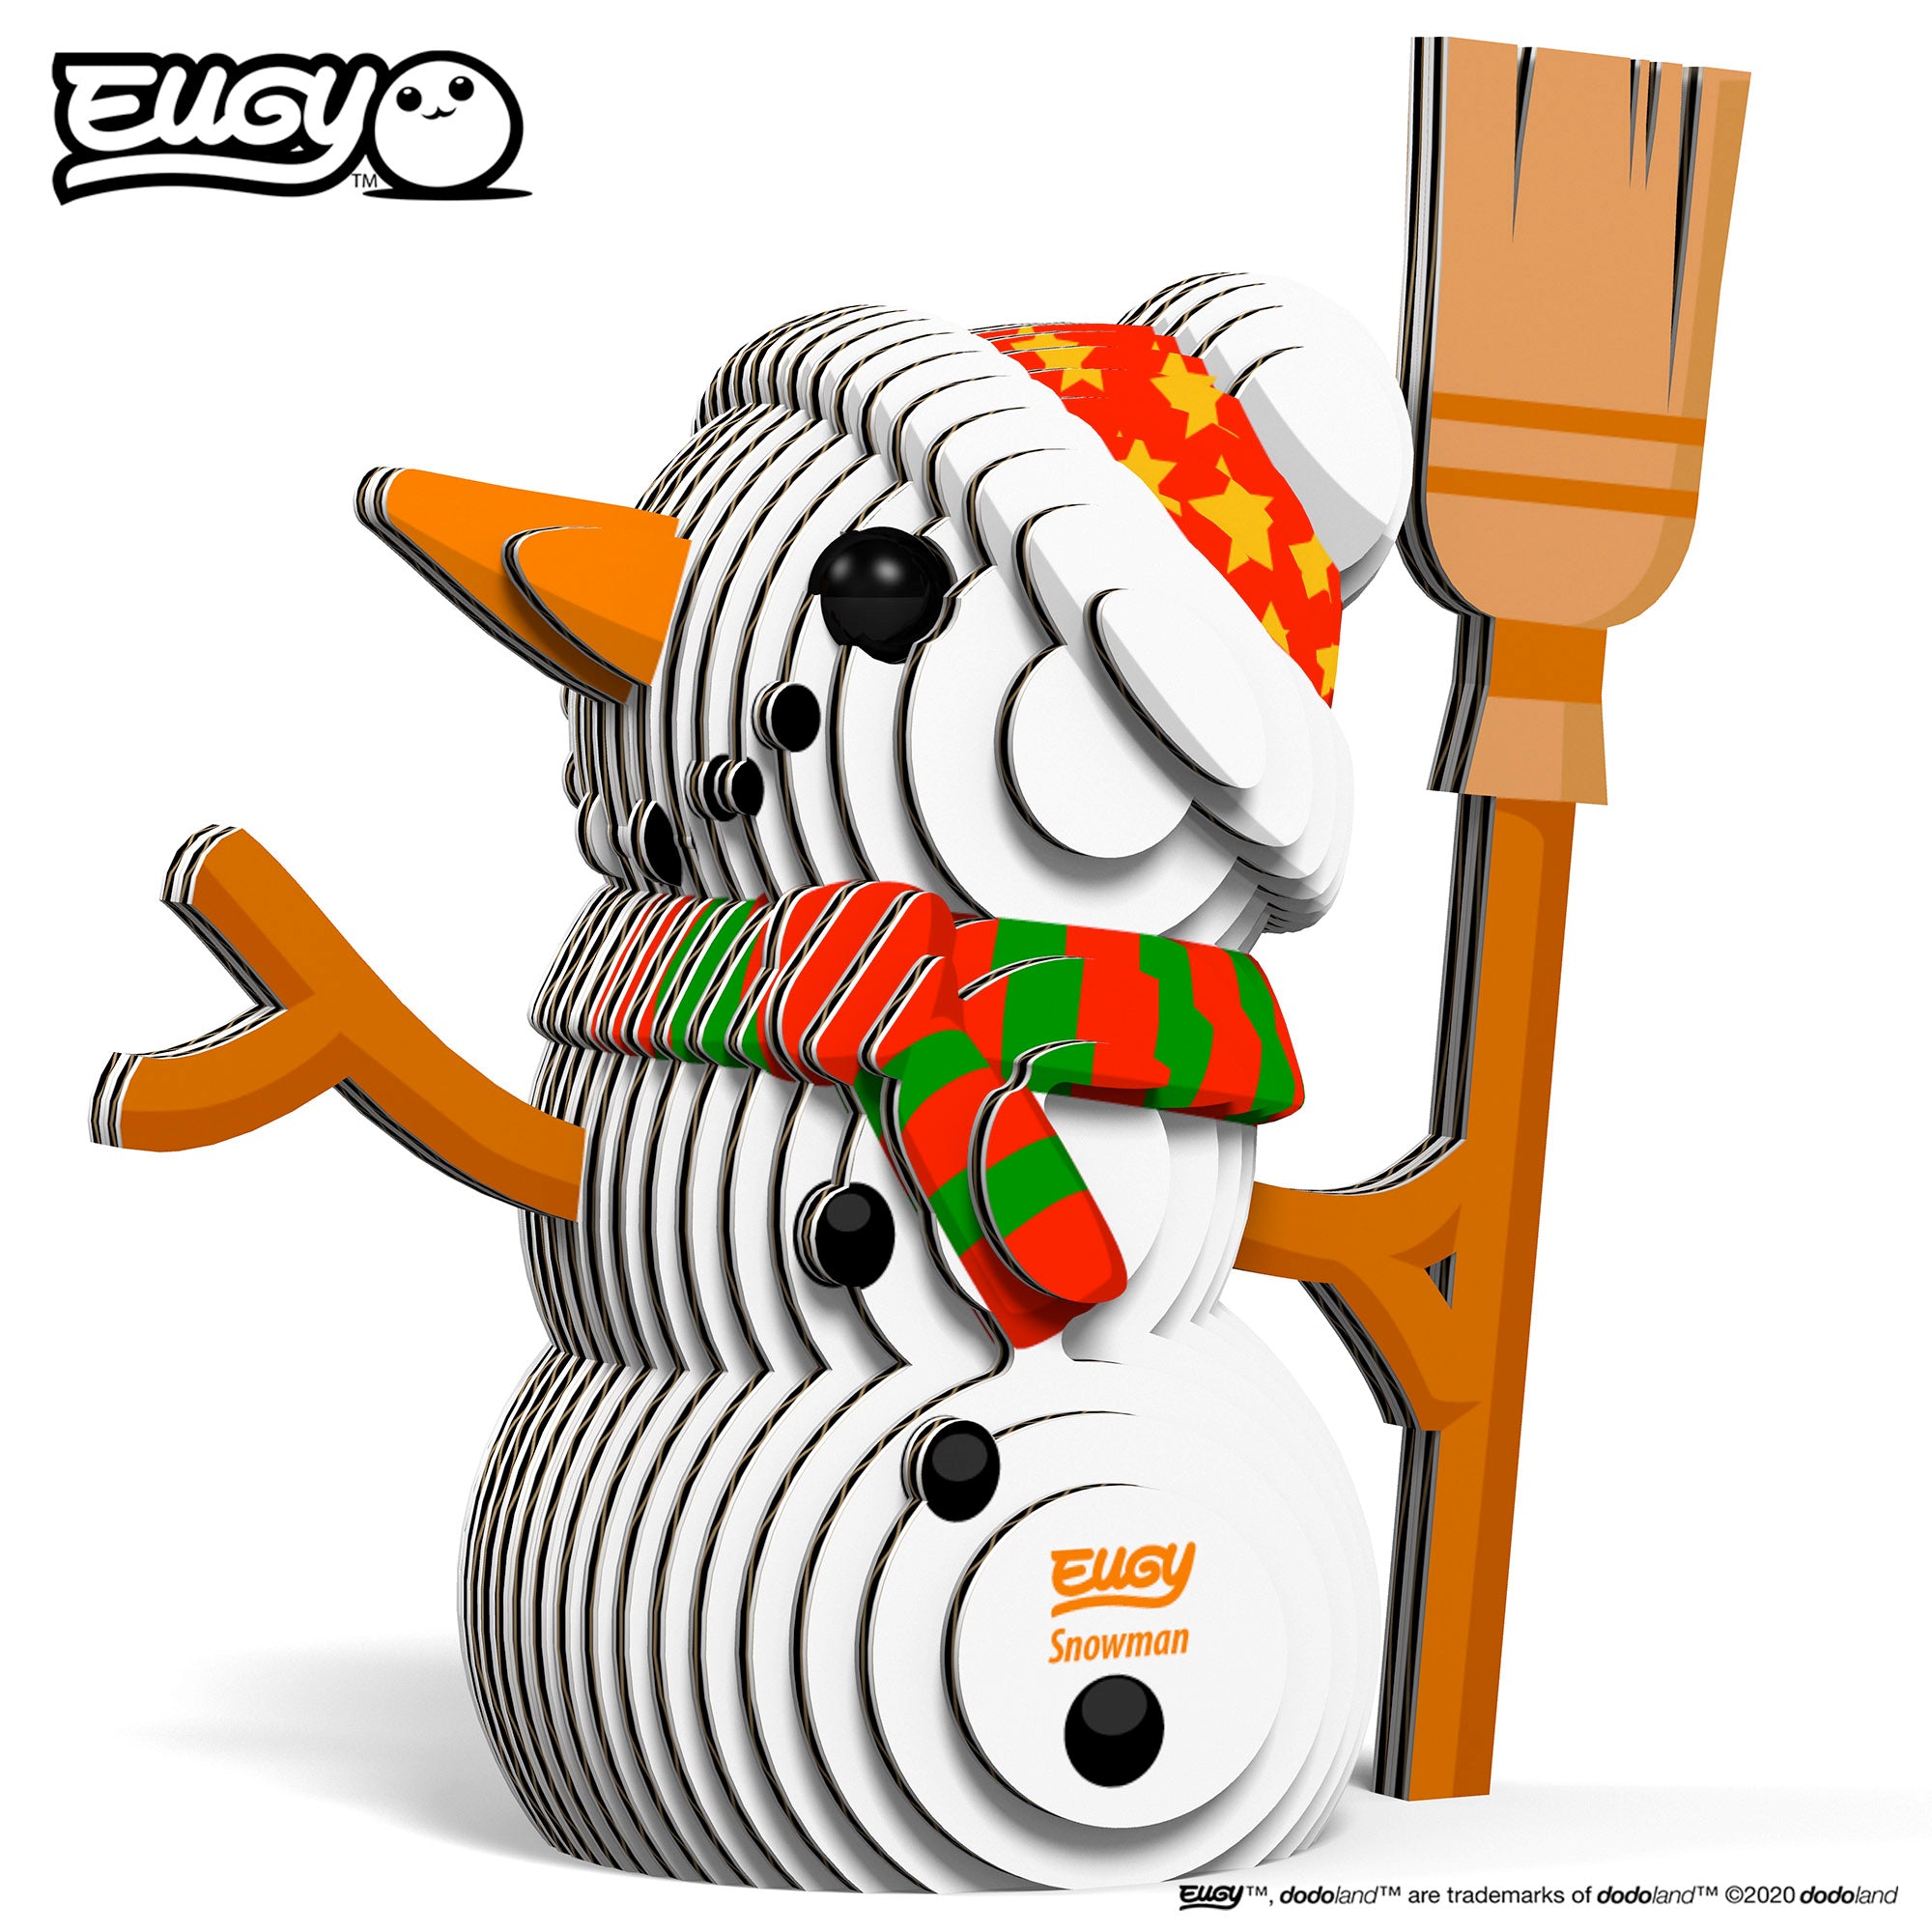 Image of an EUGY Snowman, facing left but viewed from the side, against a white background